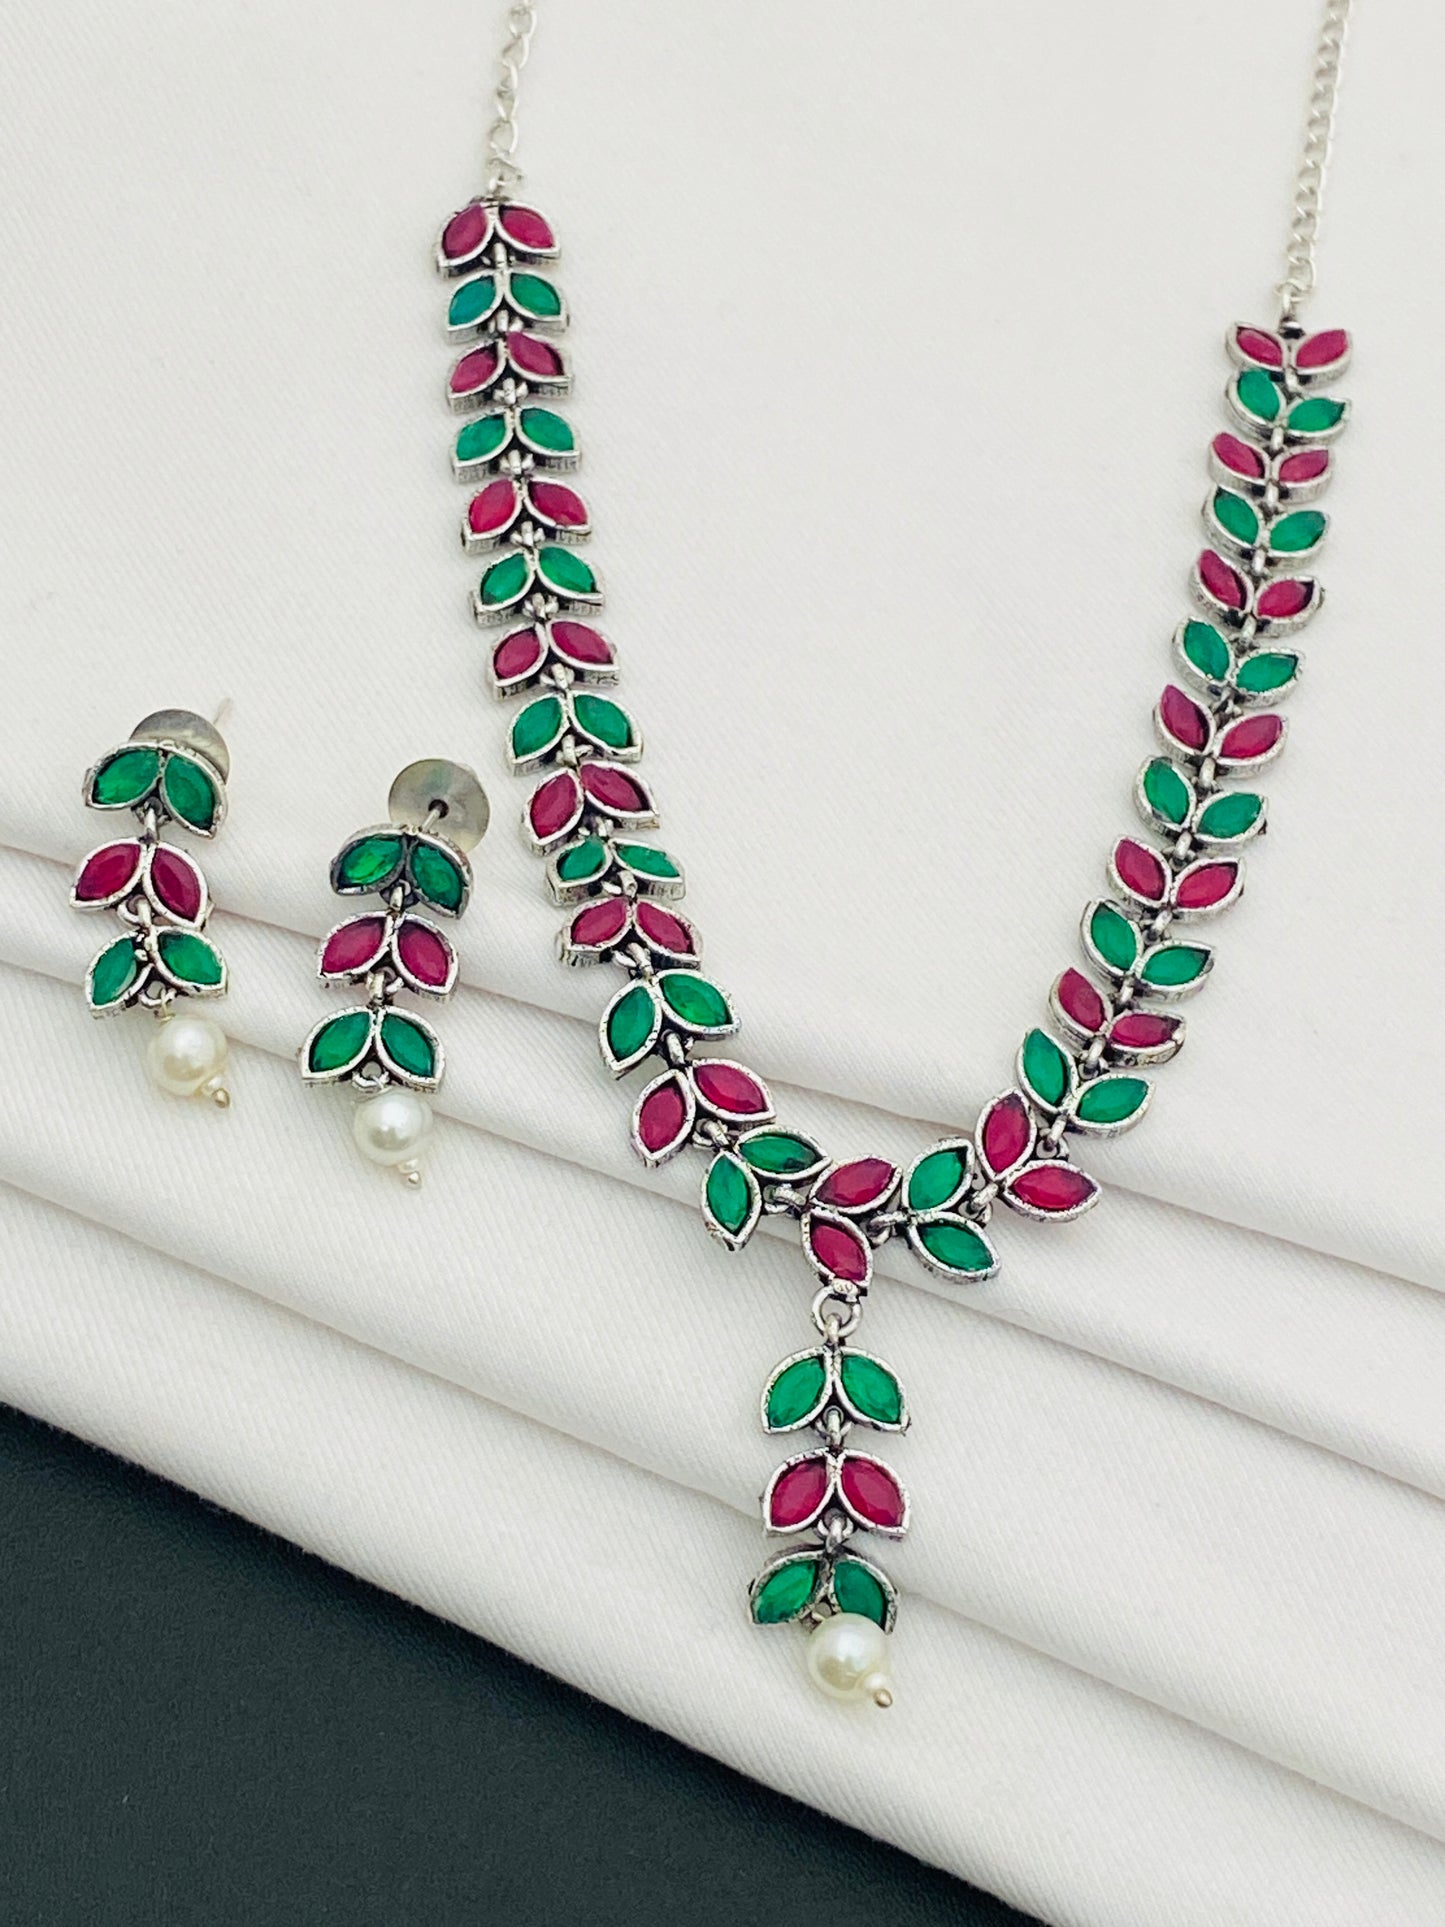 Ravishing Multi Color Stone Beaded Leaf Designed Silver Plated Oxidized Necklace With Earrings